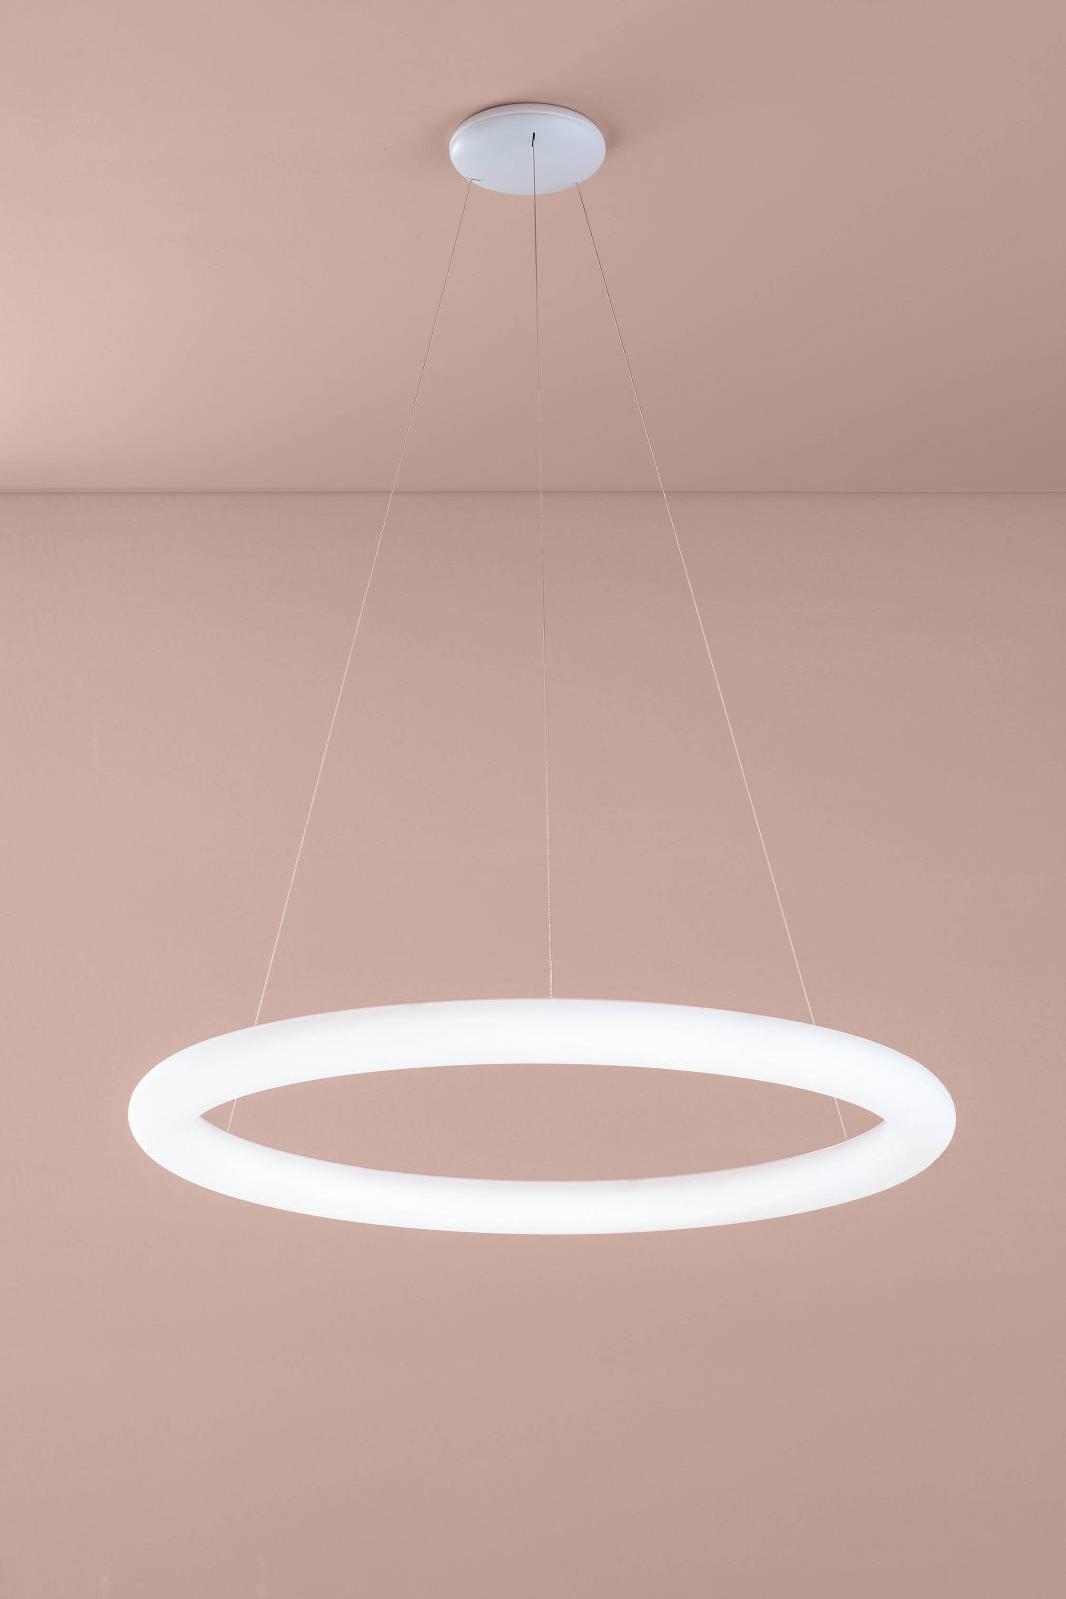 Gallery Product Polo Pendant Linealightgroup 1280X1920 3